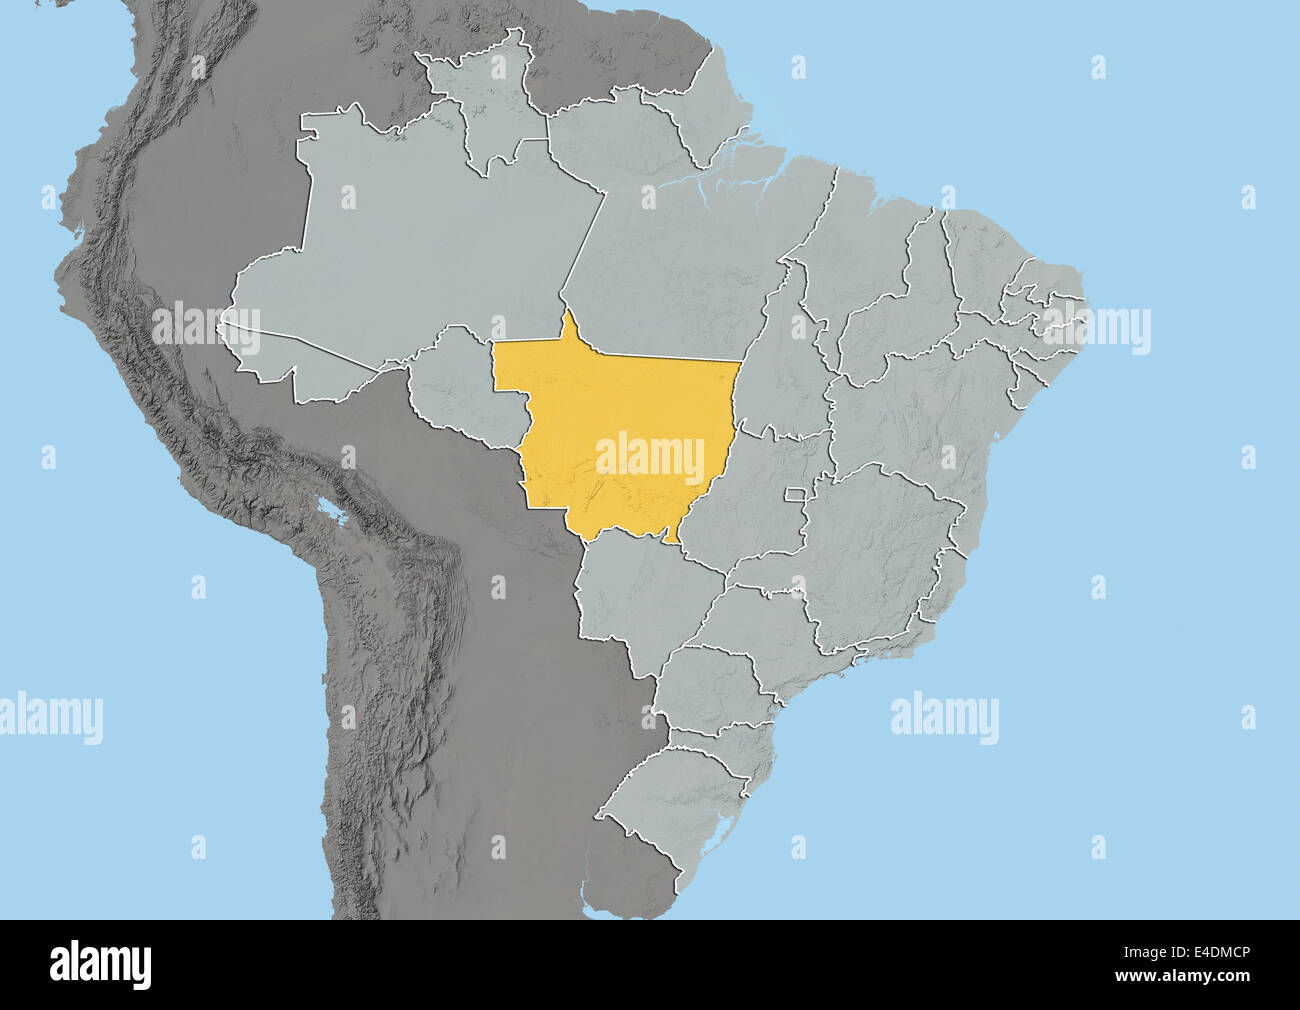 State of Mato Grosso, Brazil, Relief Map Stock Photo - Alamy